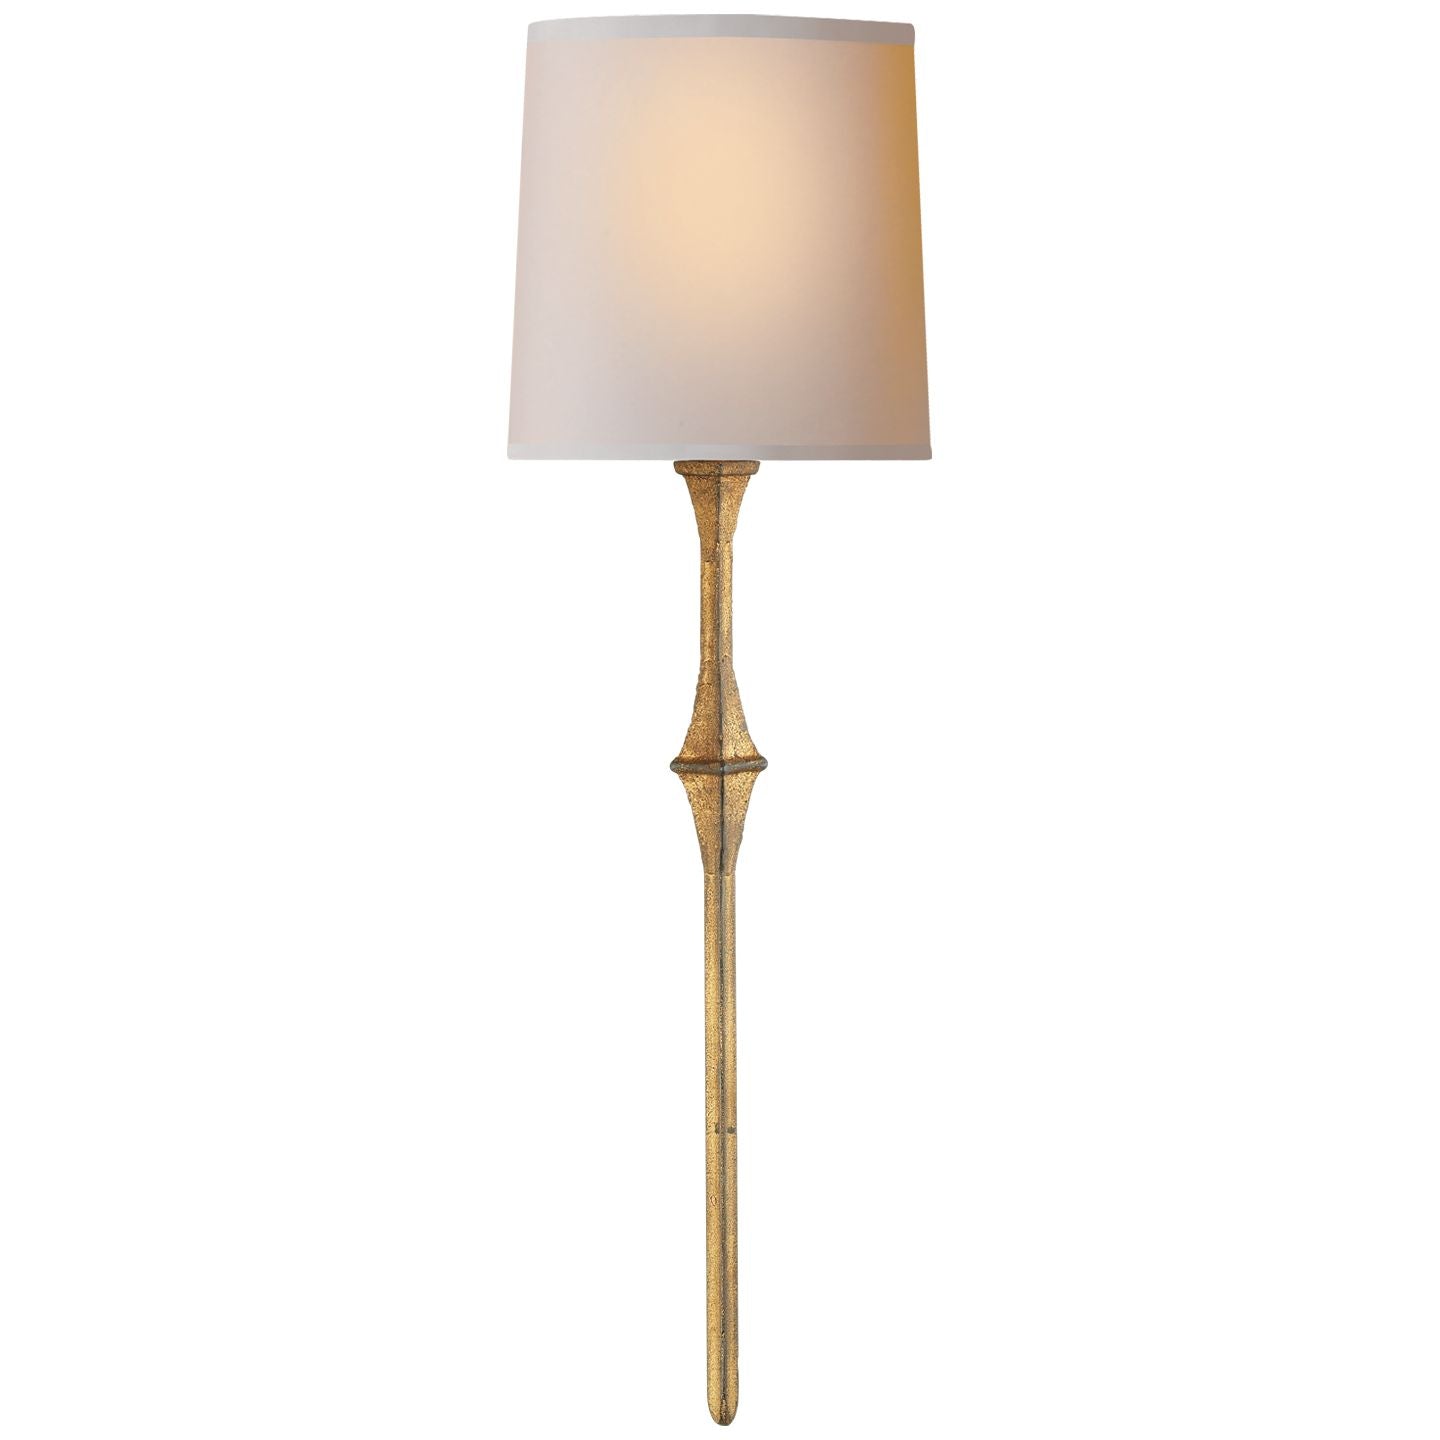 Studio VC Dauphine Wall Sconce